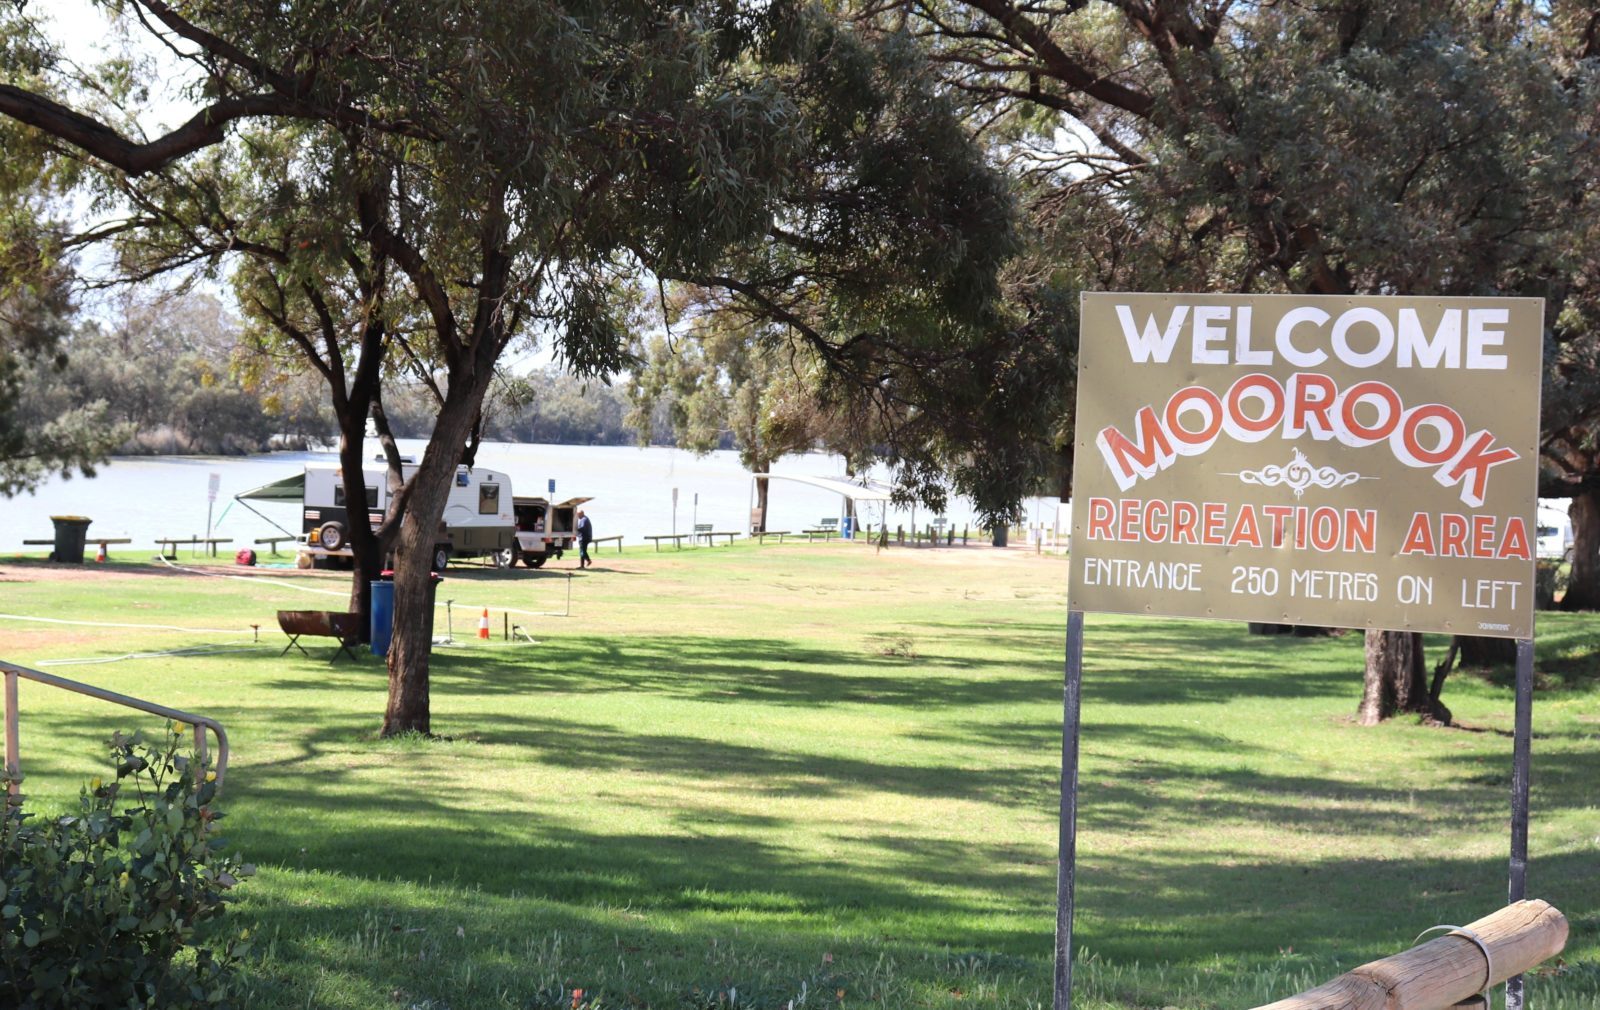 The reserve is in the heart of Moorook, right on the banks of the River Murray.